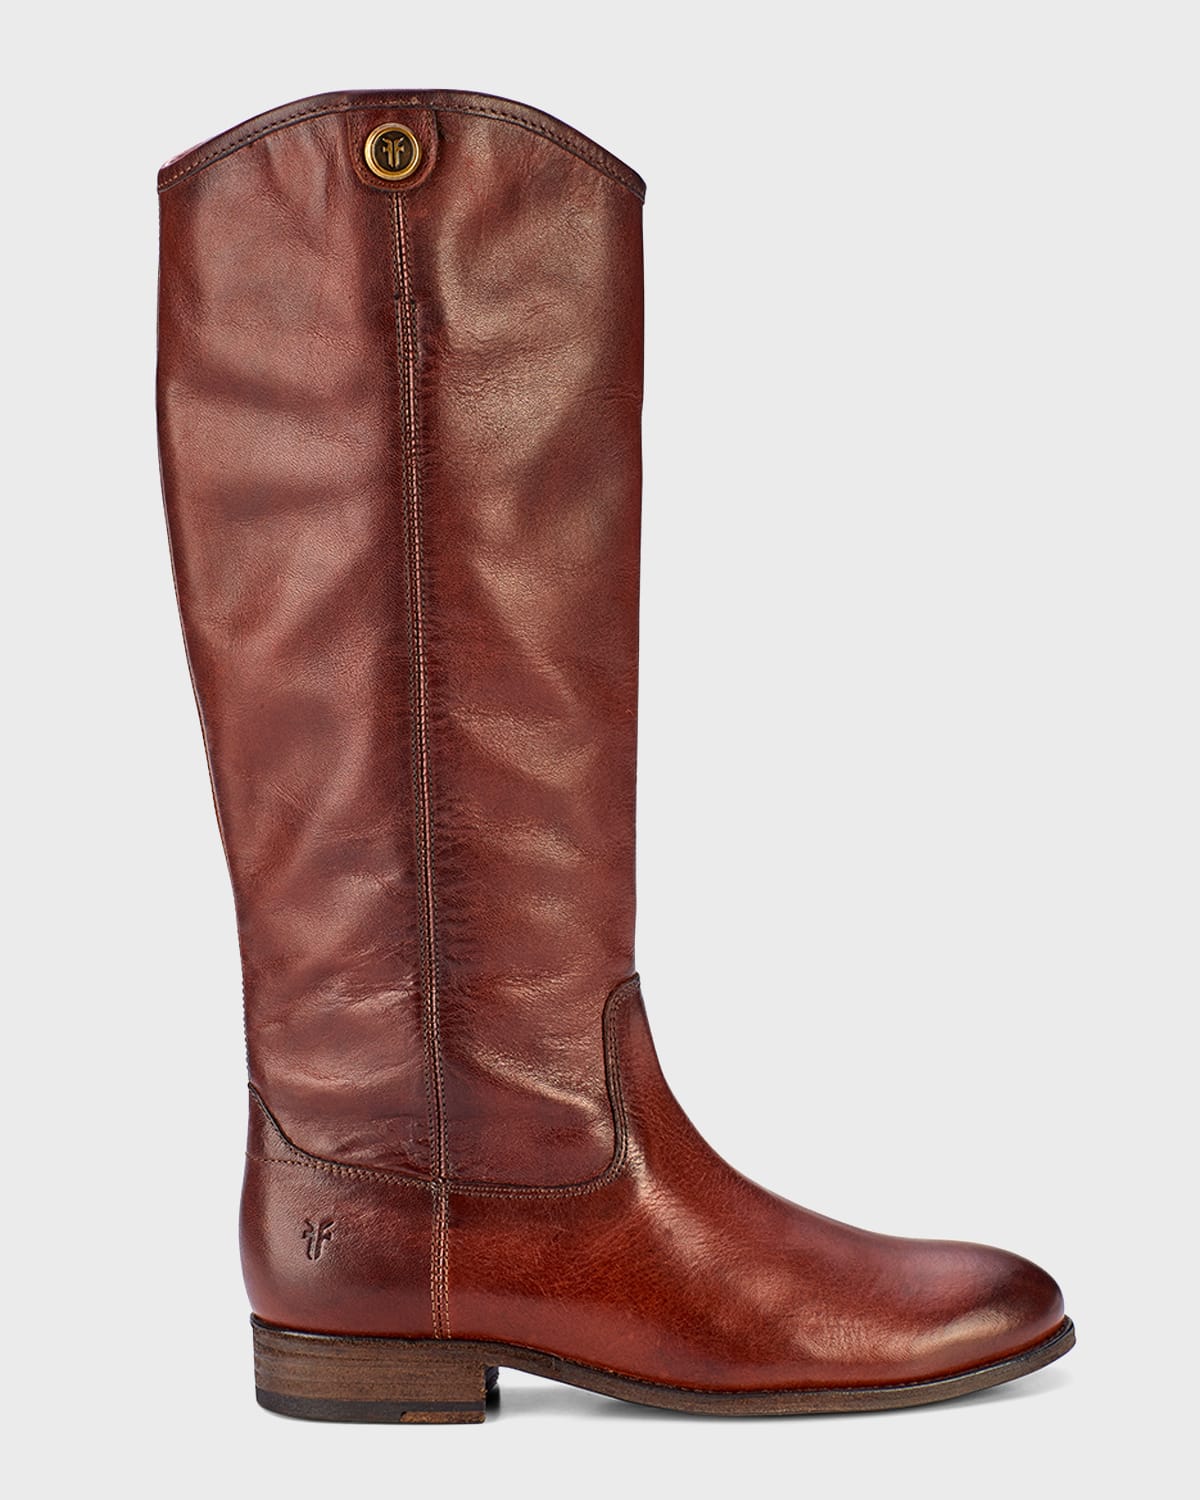 Frye Melissa Button Leather Tall Riding Boots